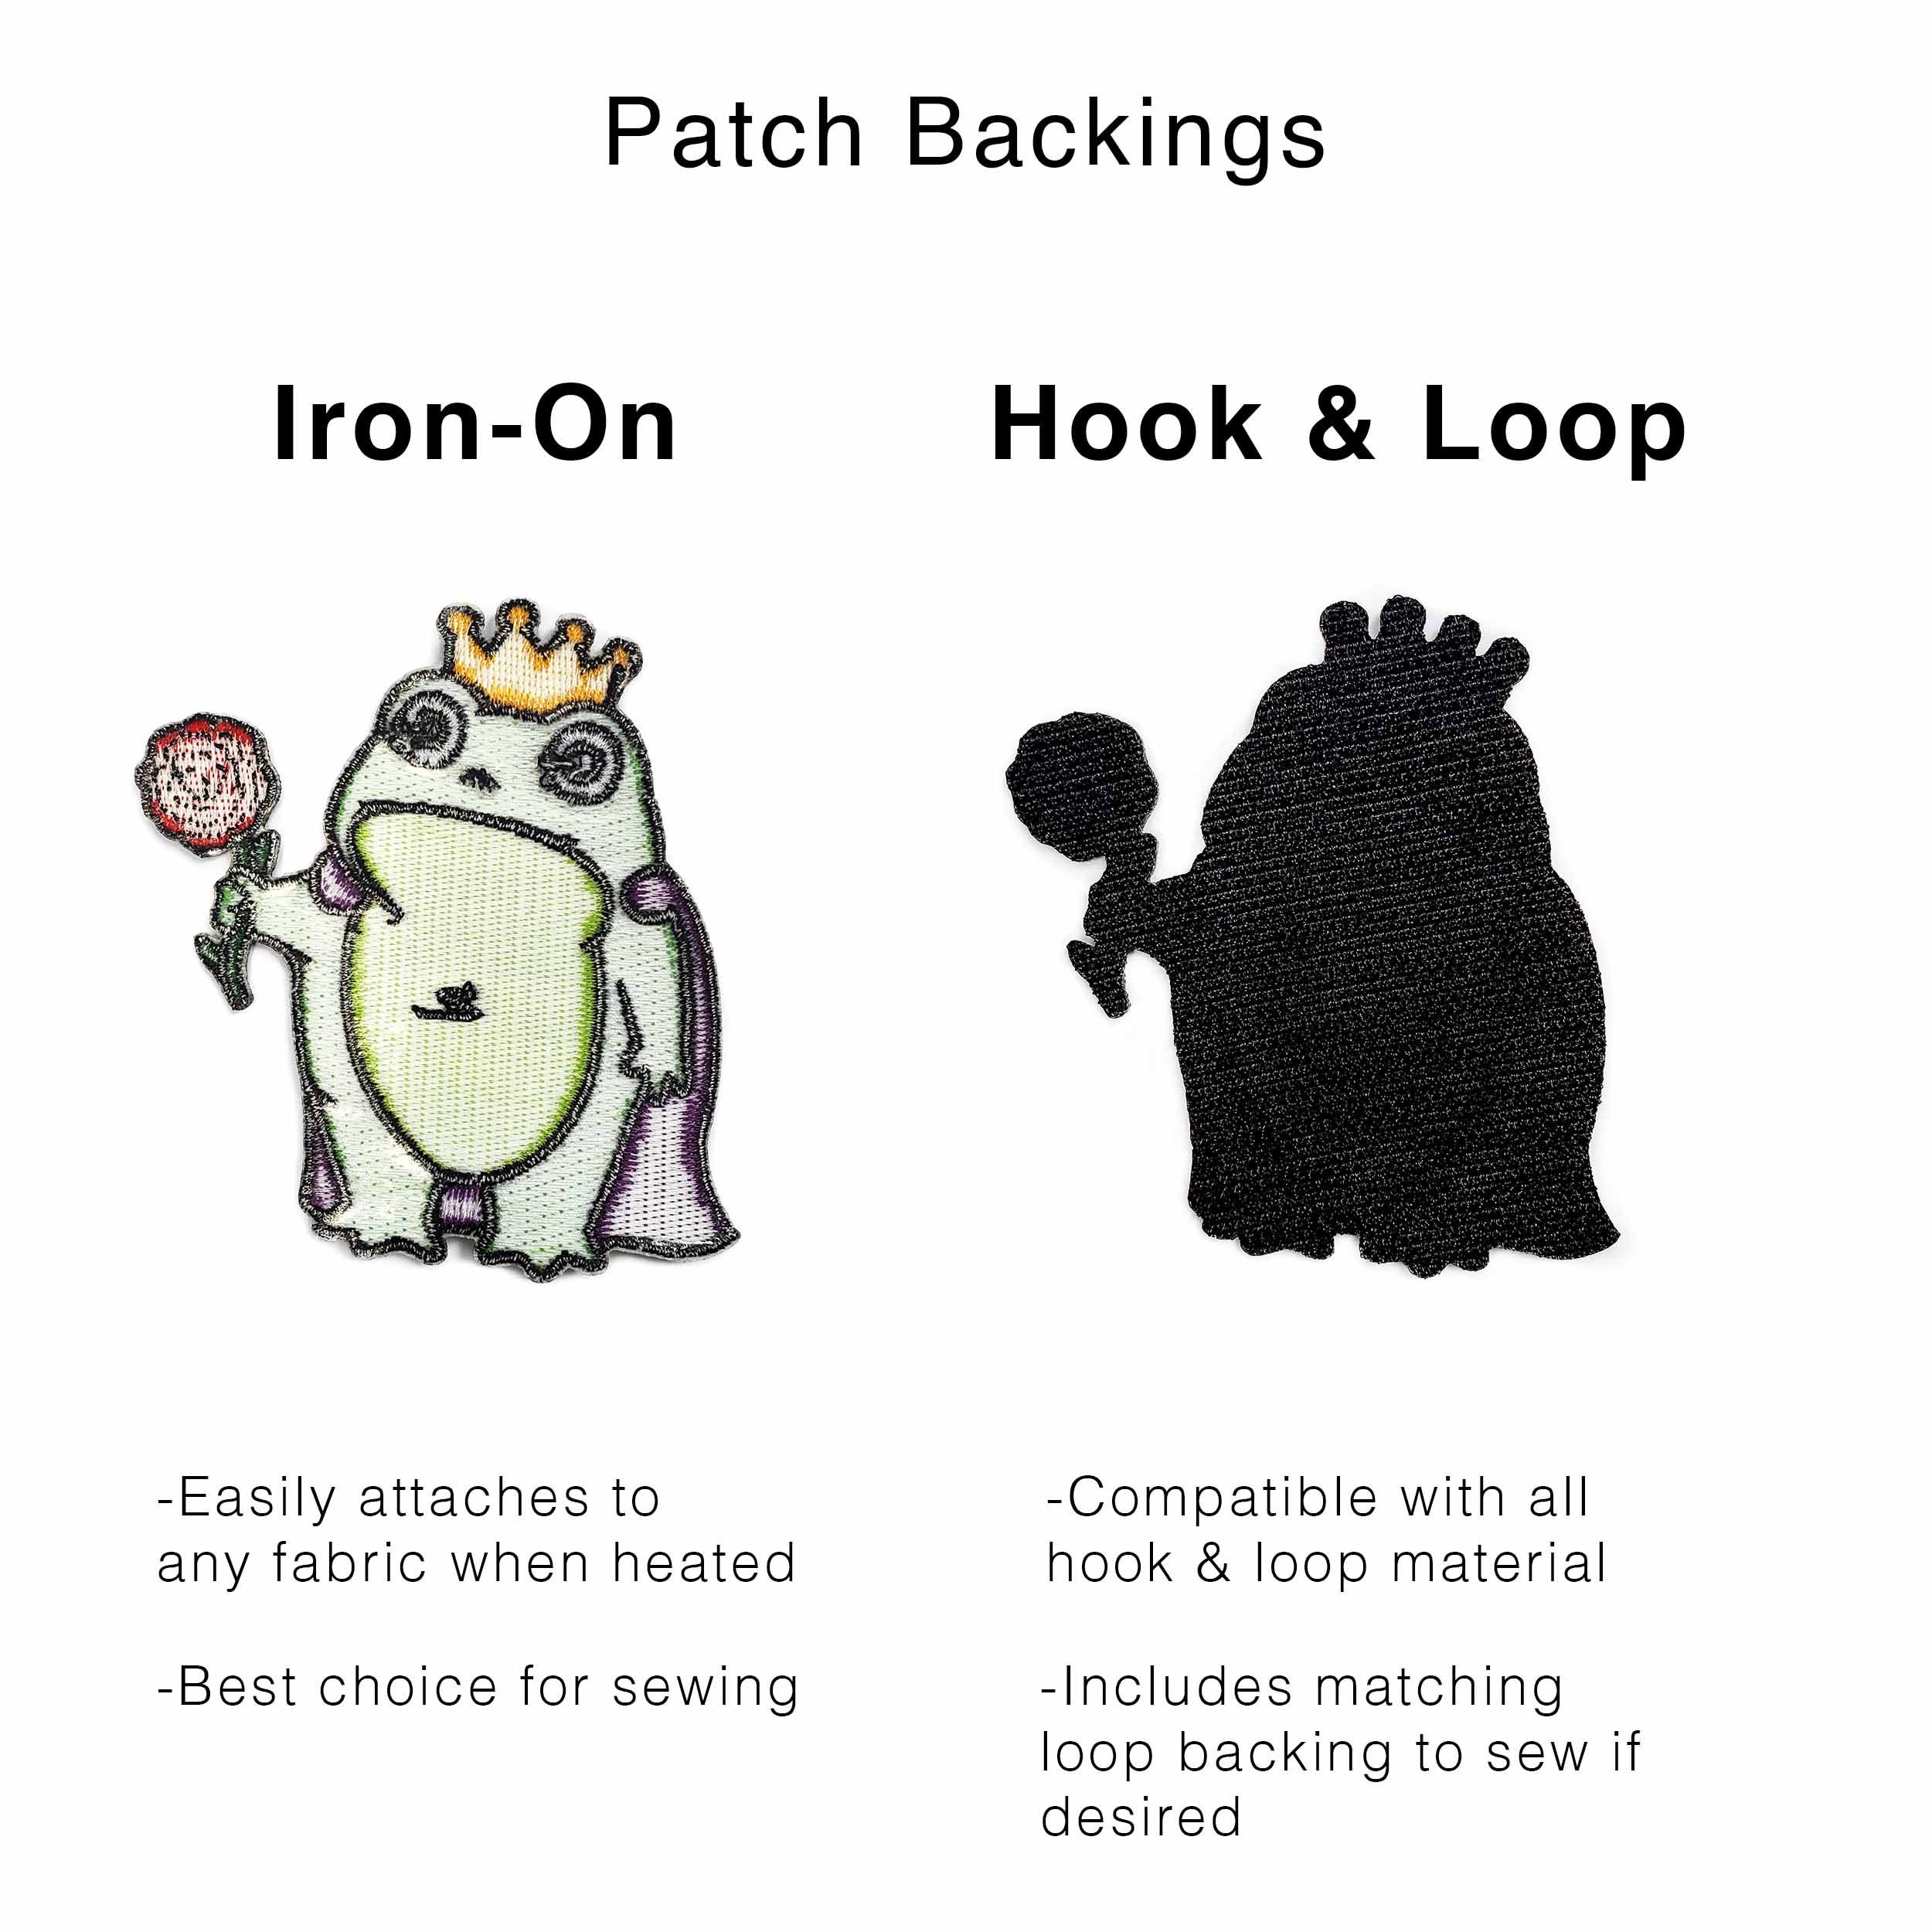 Turn Iron-On Patches into Hook And Loop Patches